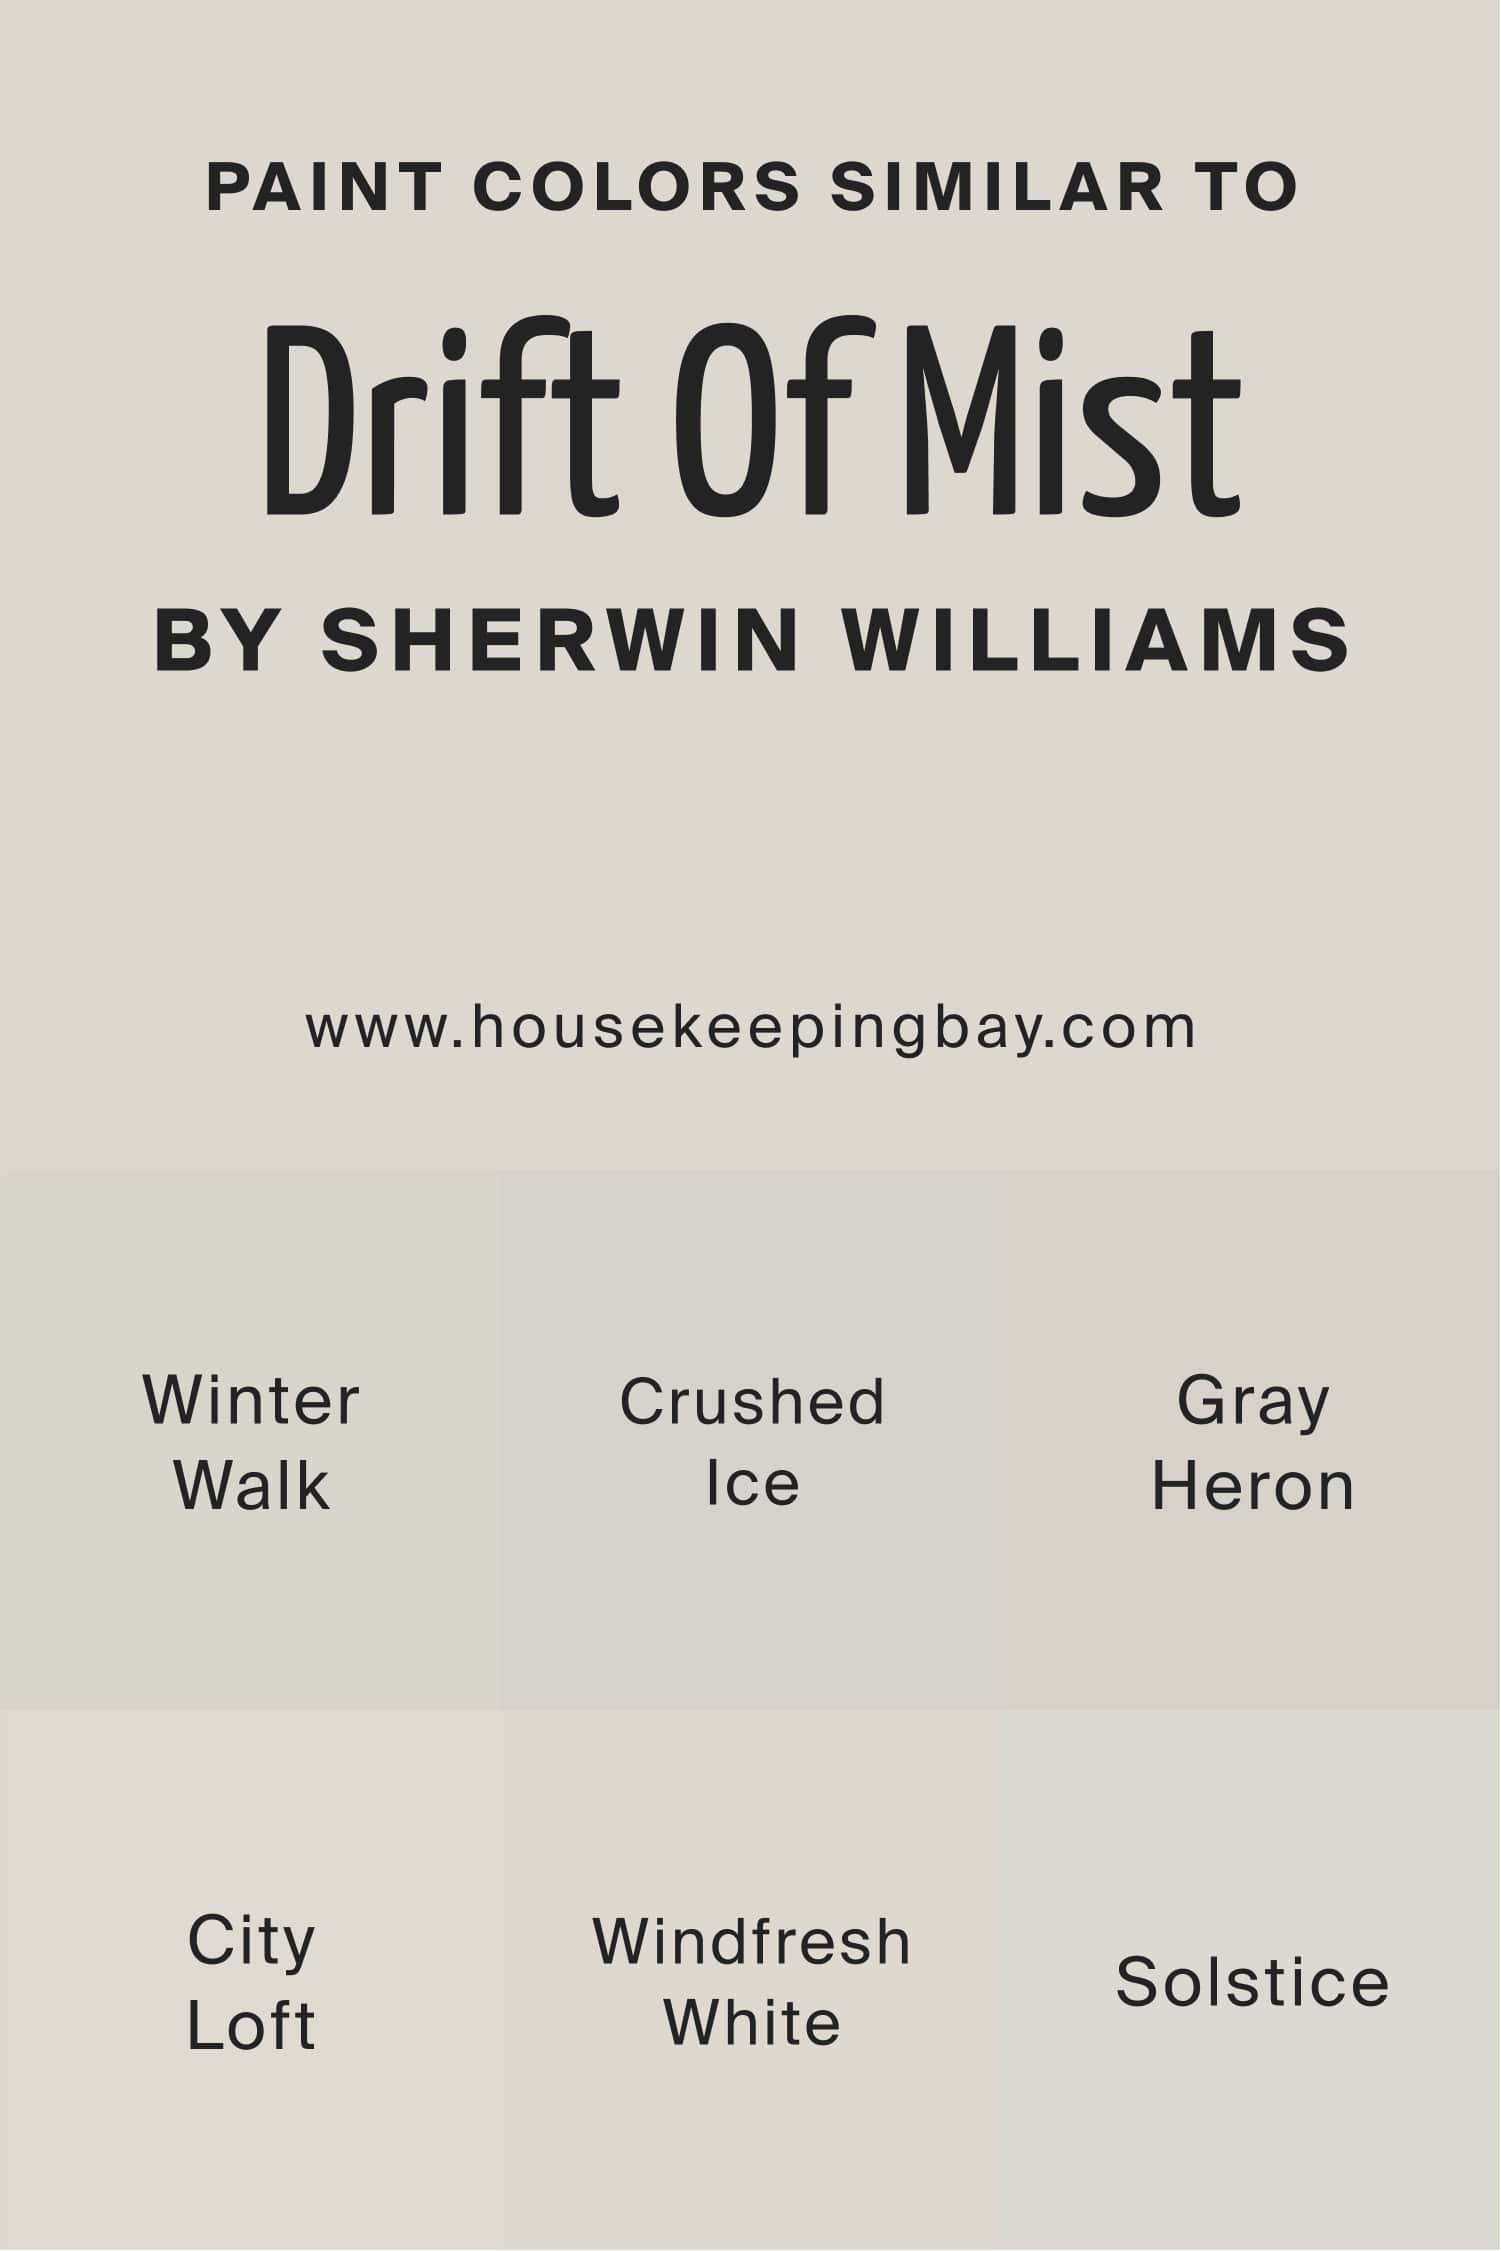 Paint Colors Similar to Drift Of Mist by Sherwin Williams